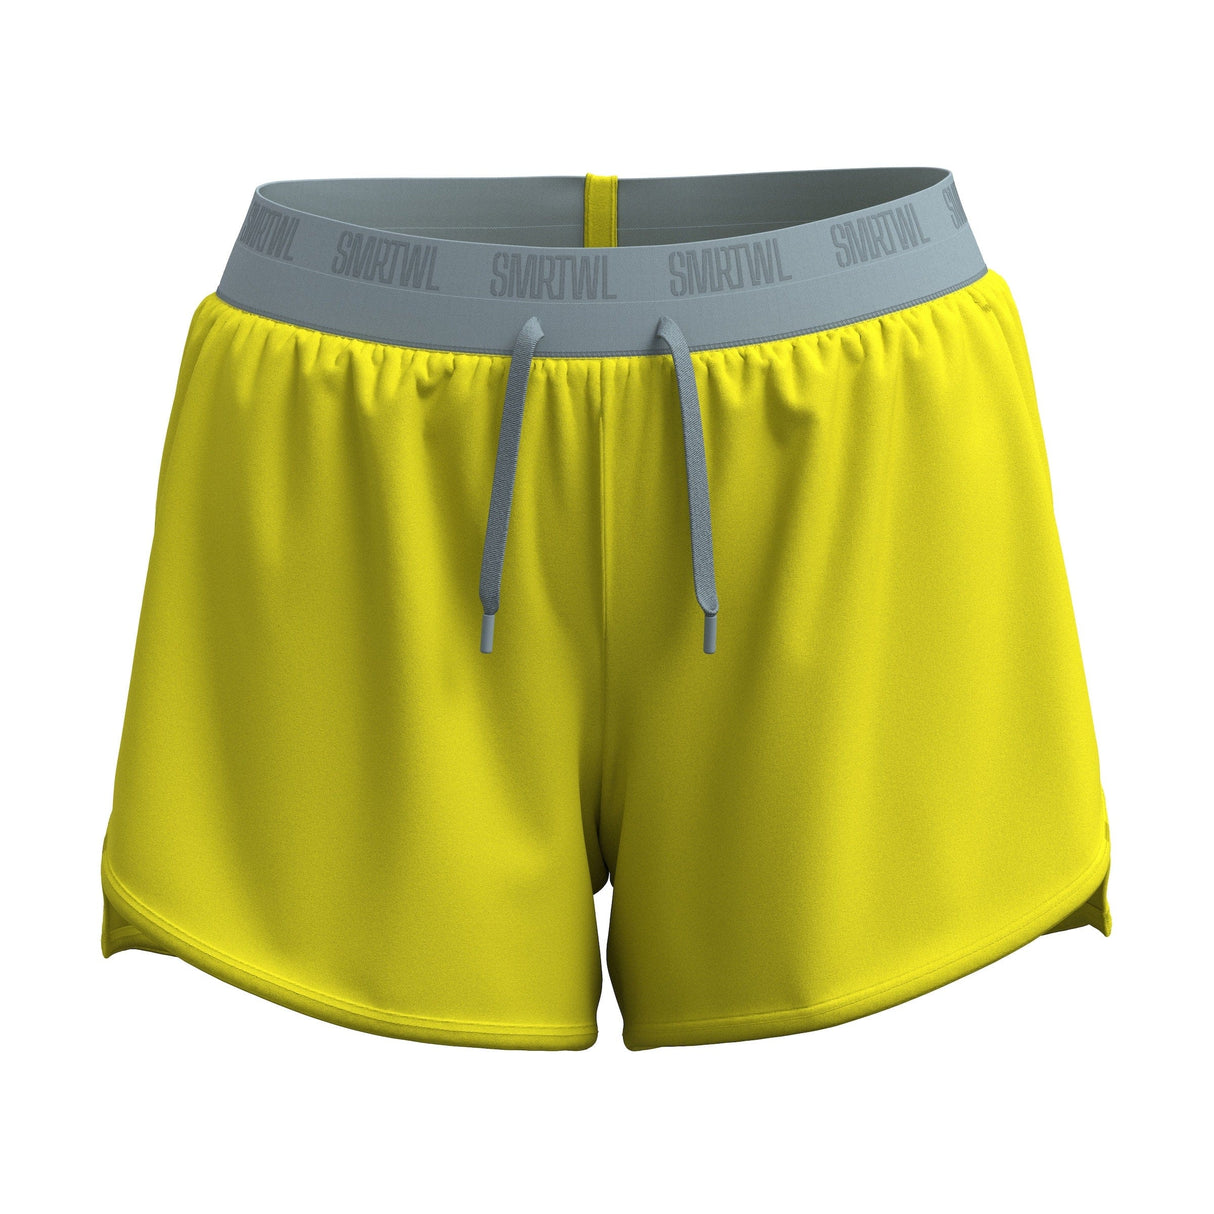 Smartwool Womens Active Lined 4" Shorts  -  Medium / Limeade